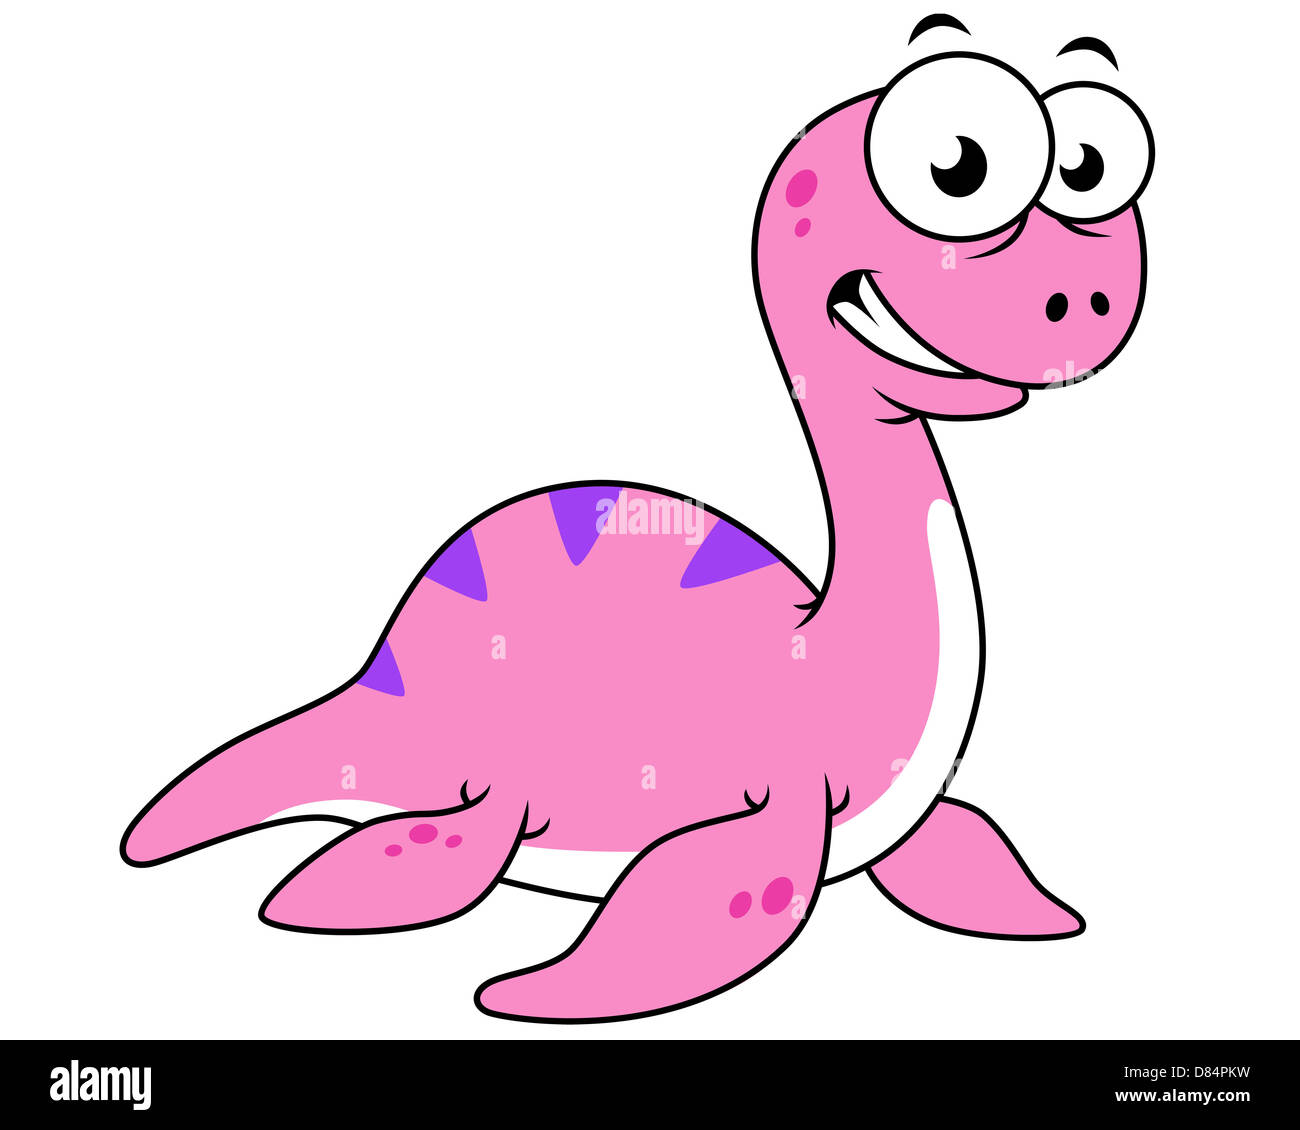 Cute illustration of the Loch Ness Monster. Stock Photo